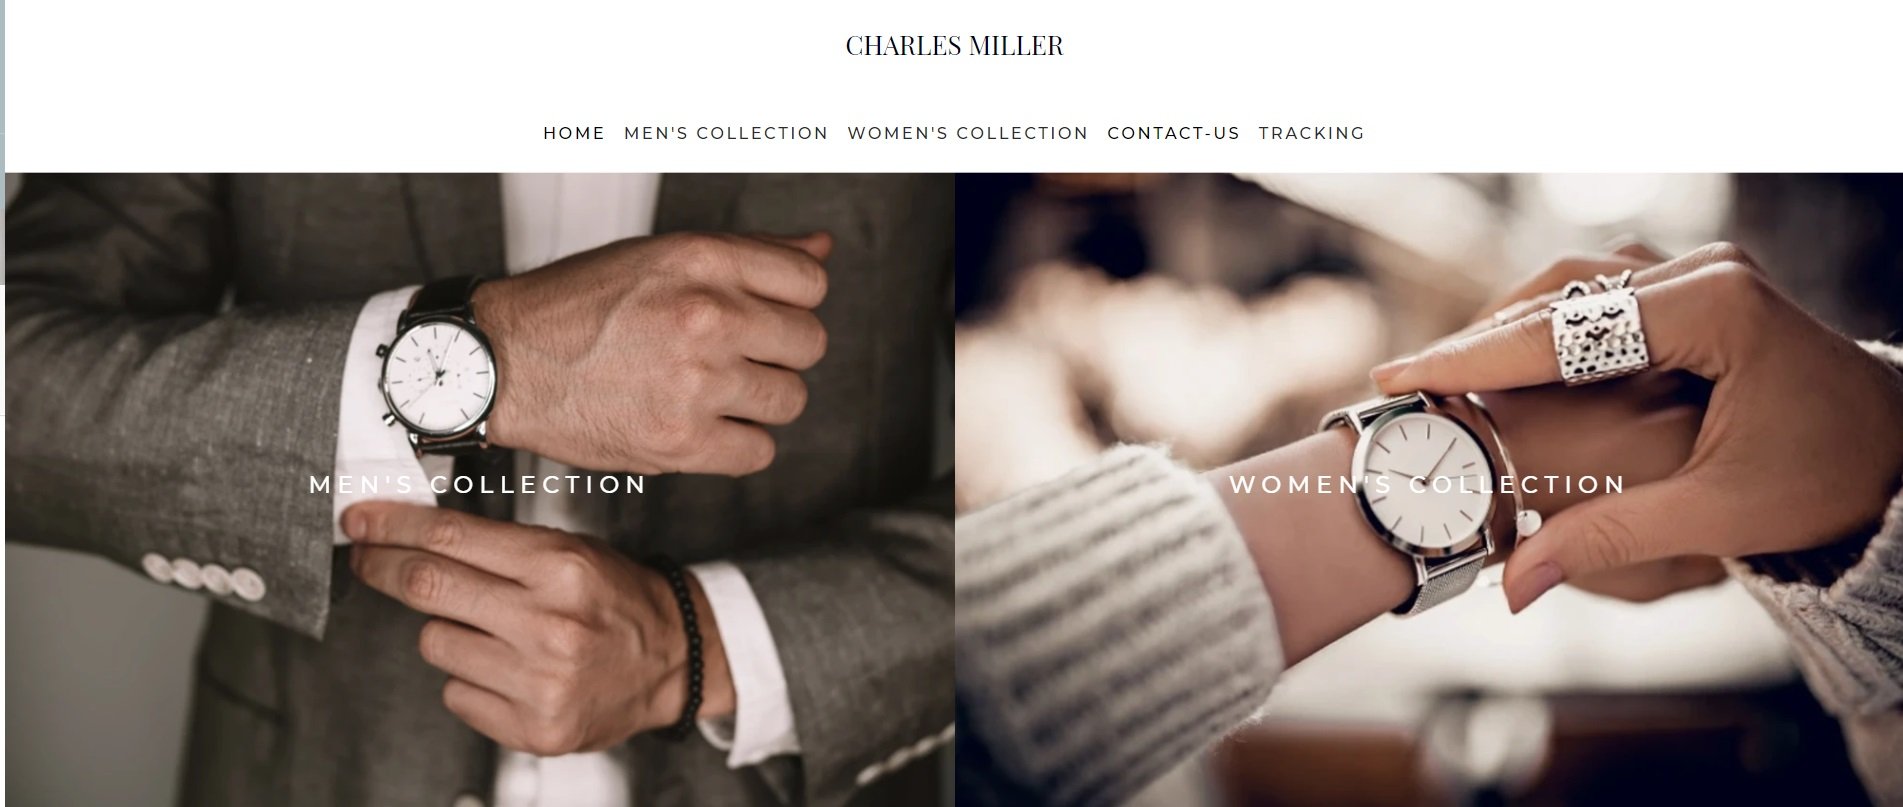 The Charles Miller store located at charles-miller.shop